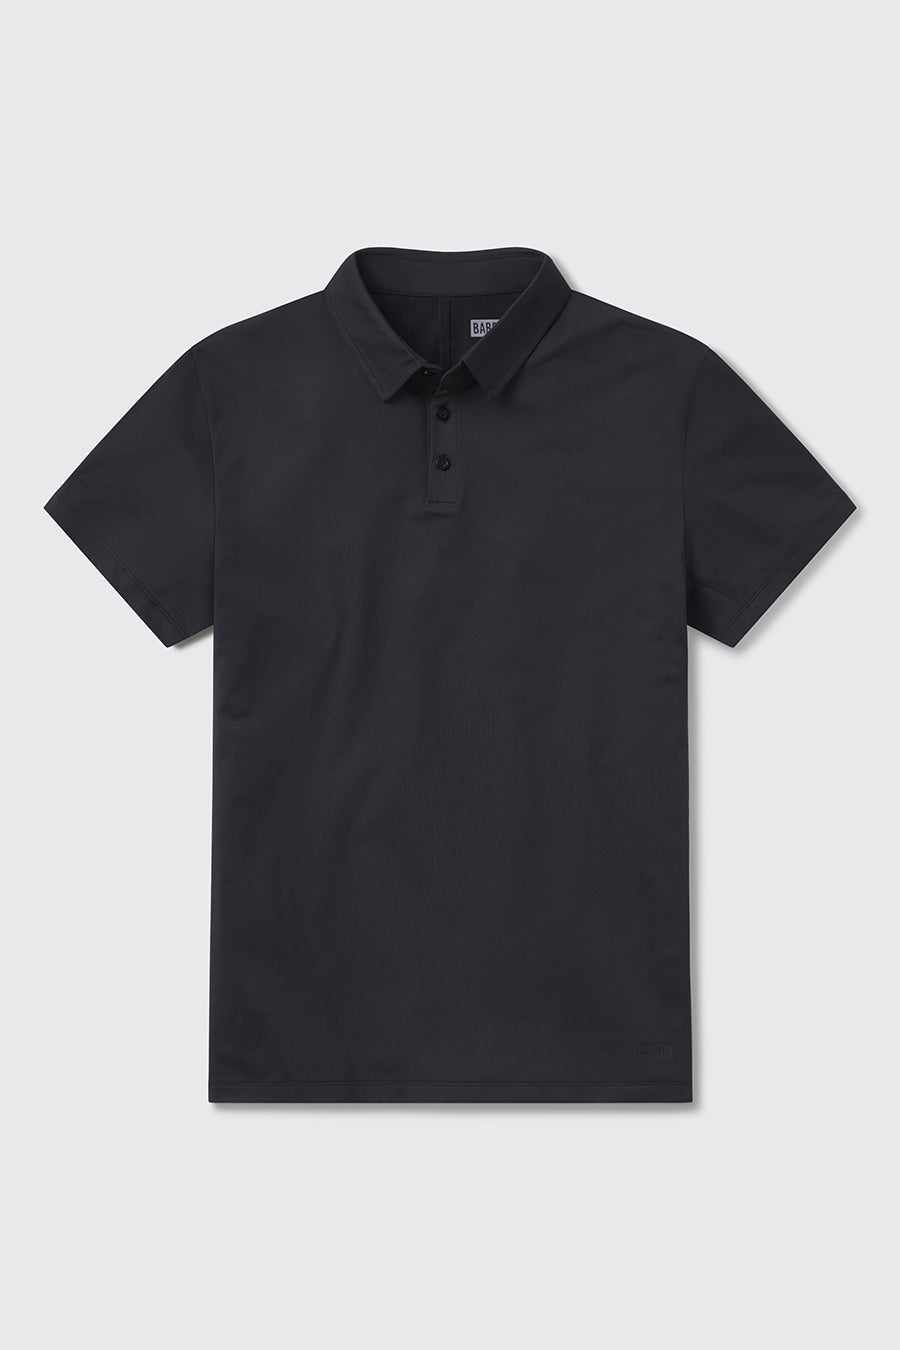 Havok Polo -Black - photo from front flat lay #color_black